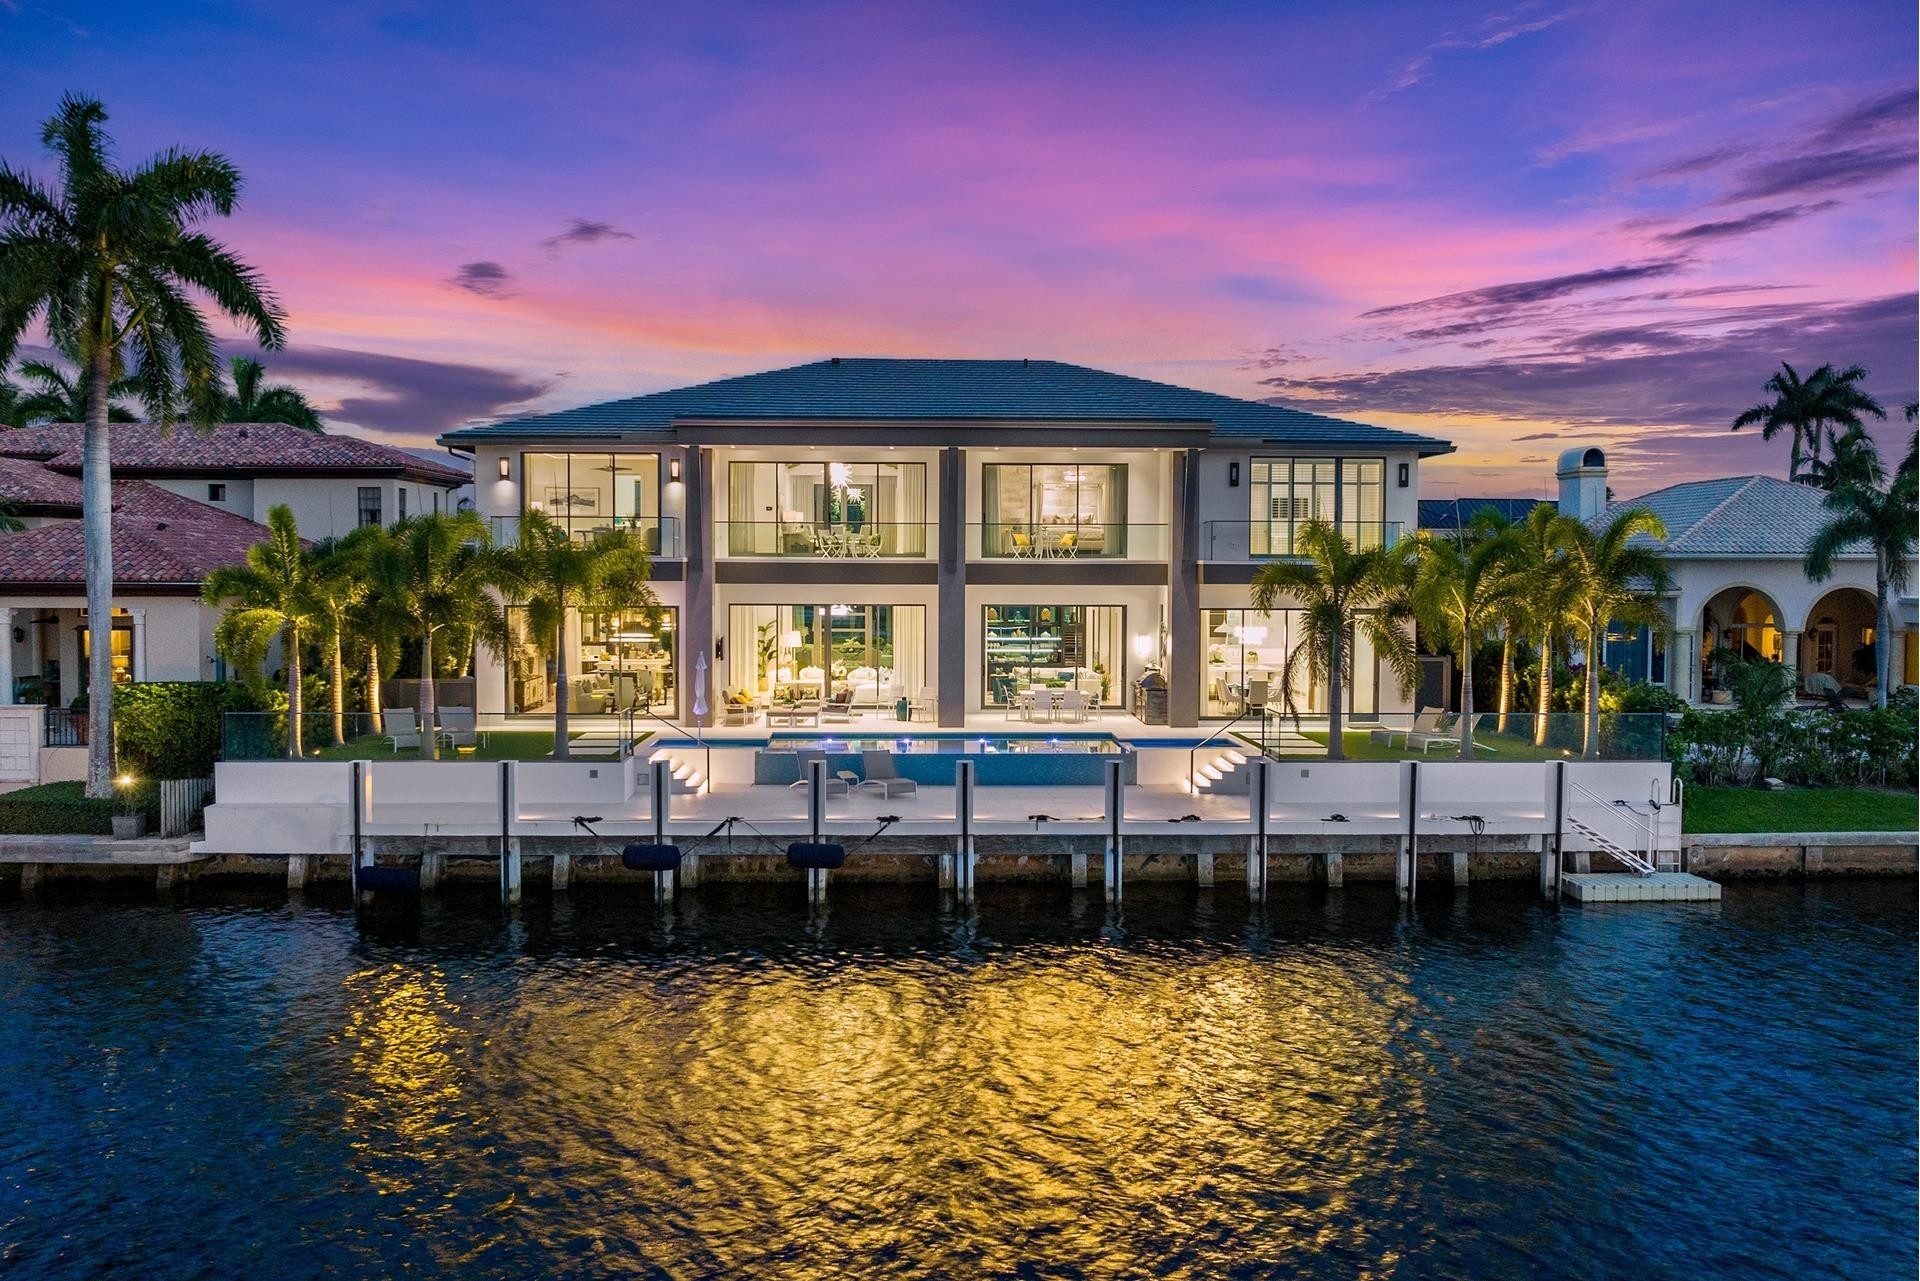 Single Family Home for Sale at Royal Palm Yacht and Country Club, Boca Raton, FL 33432